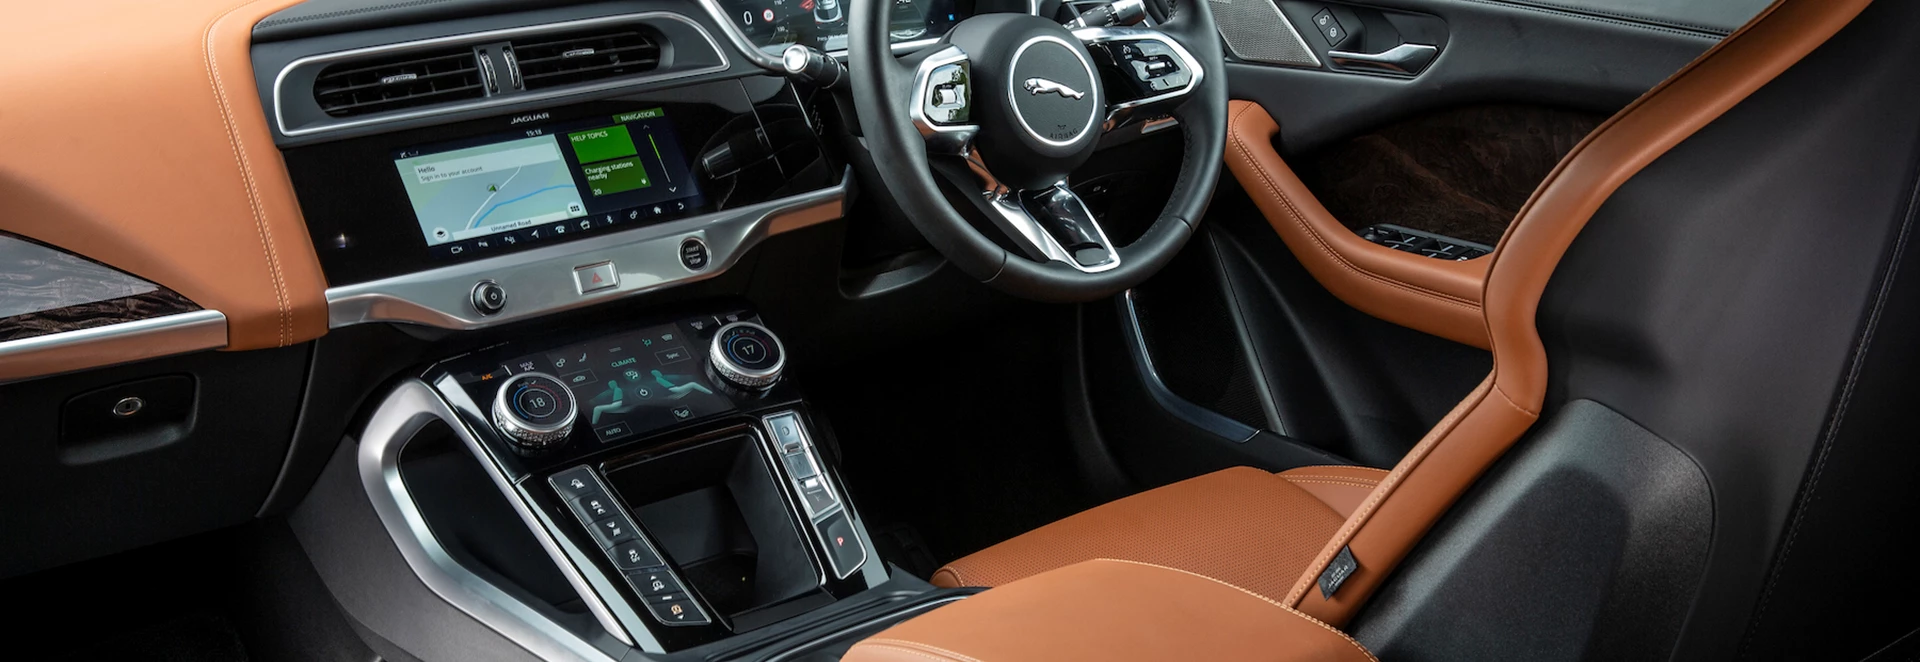 The 5 best SUV interiors of 2019 